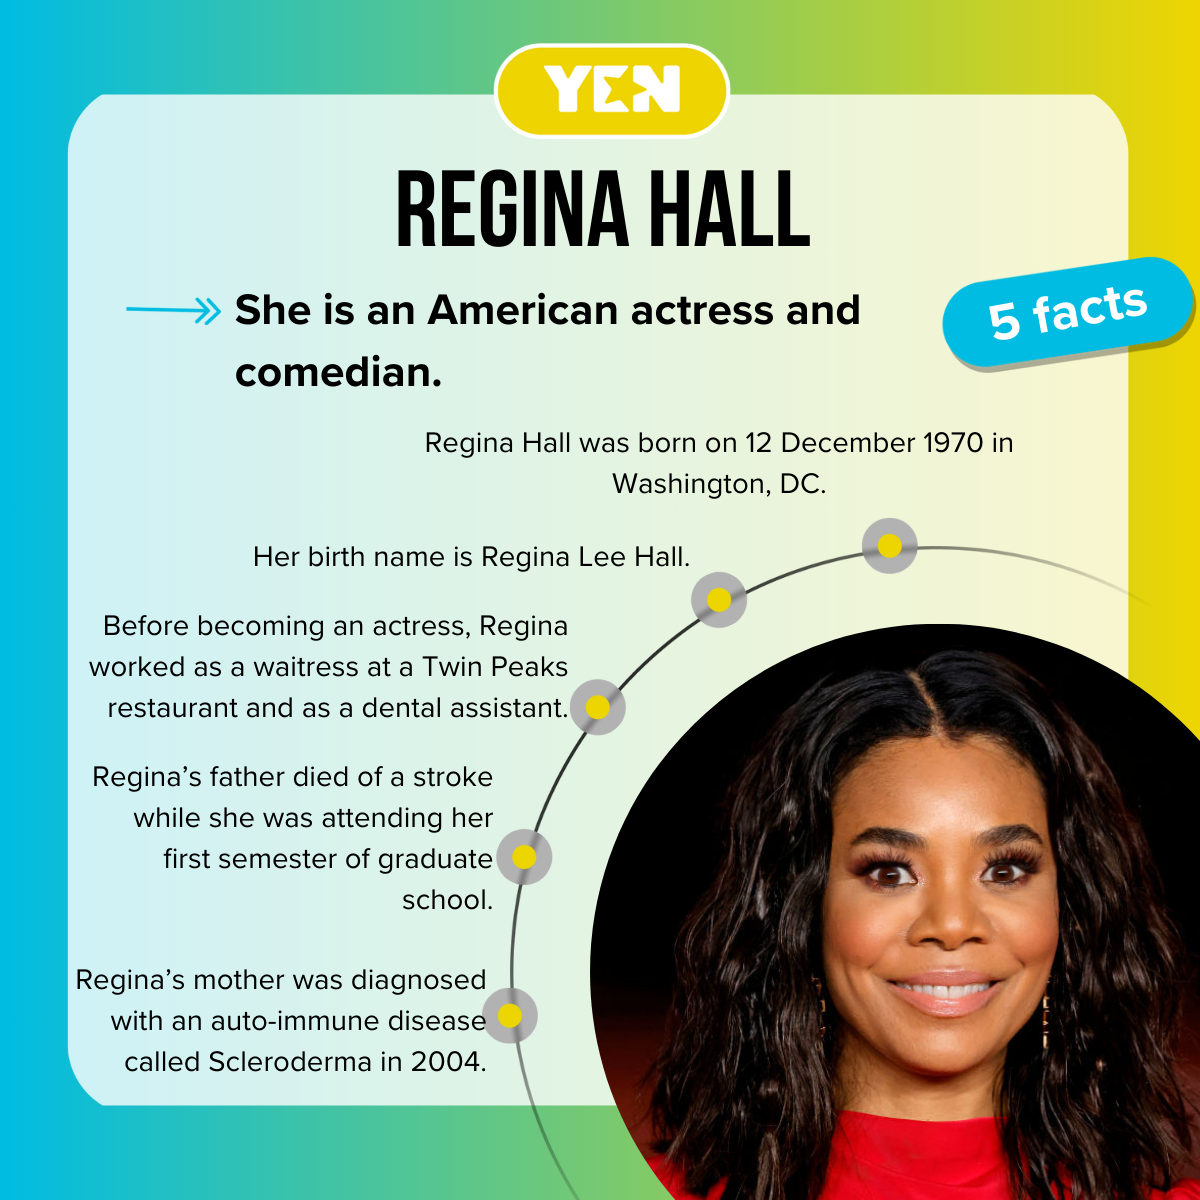 5 facts about Regina Hall